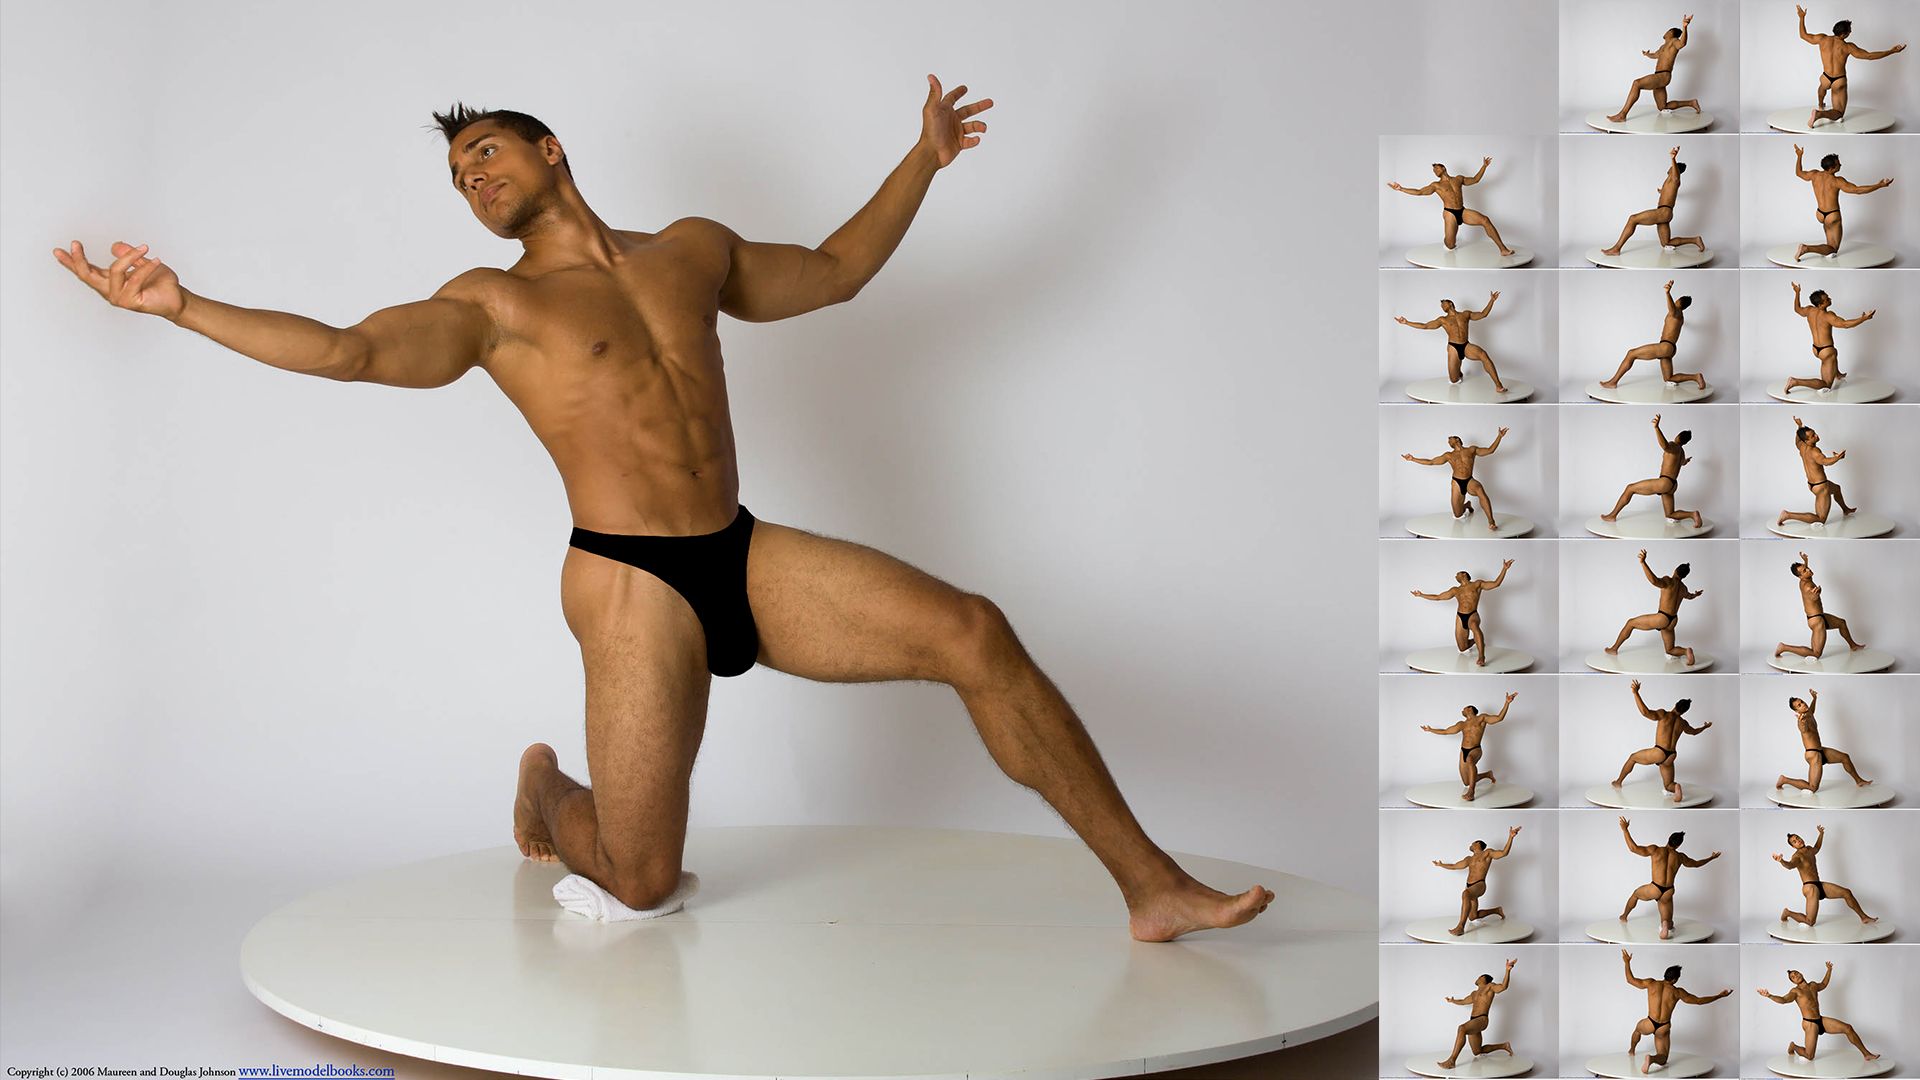 Large Image of a Posed Life Model with Thumbnails of the Pose from all Angles